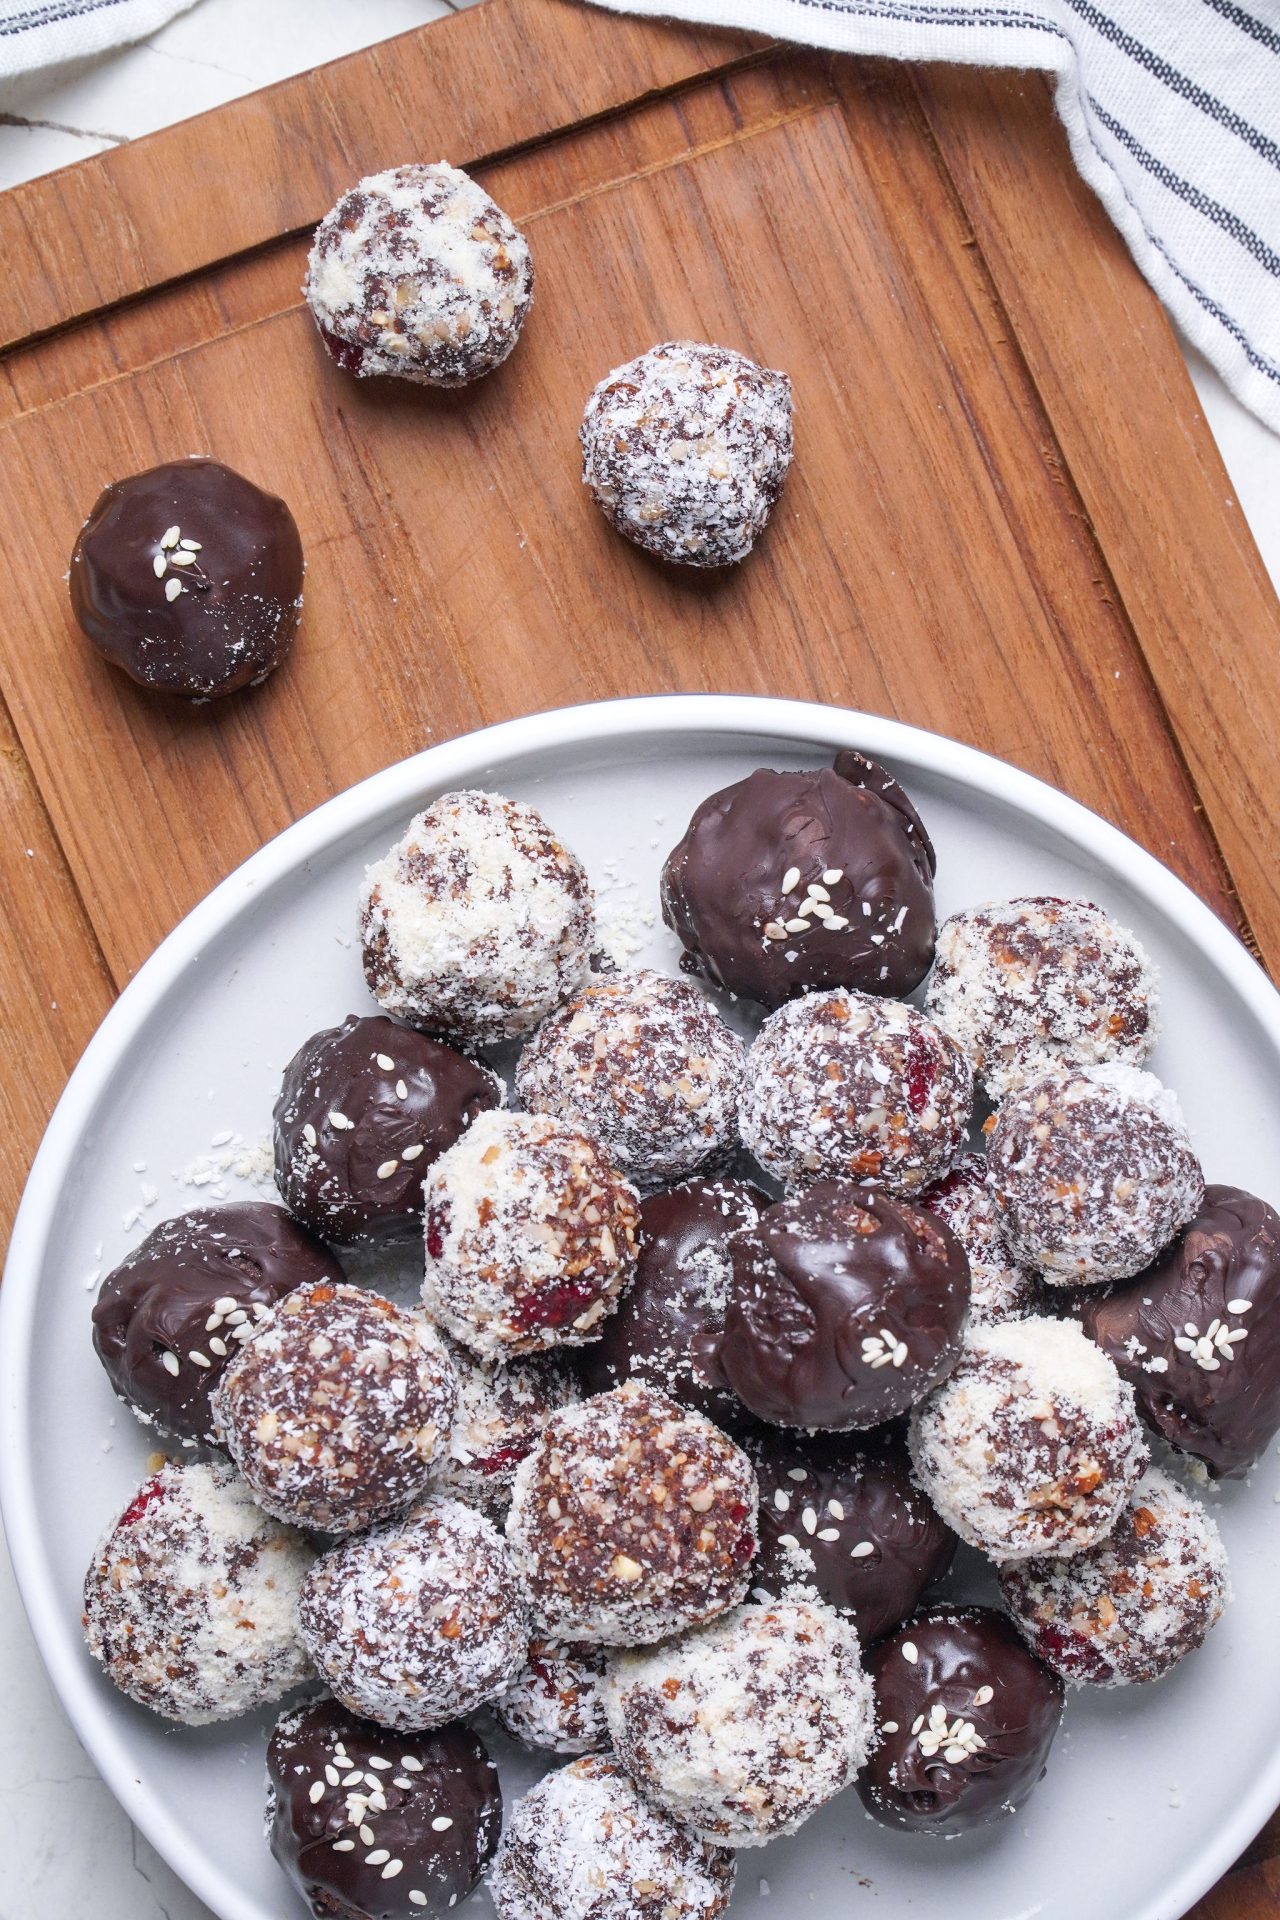 Bliss ball truffles close up image - made with dates, cacao, mixed nuts, desiccated coconut